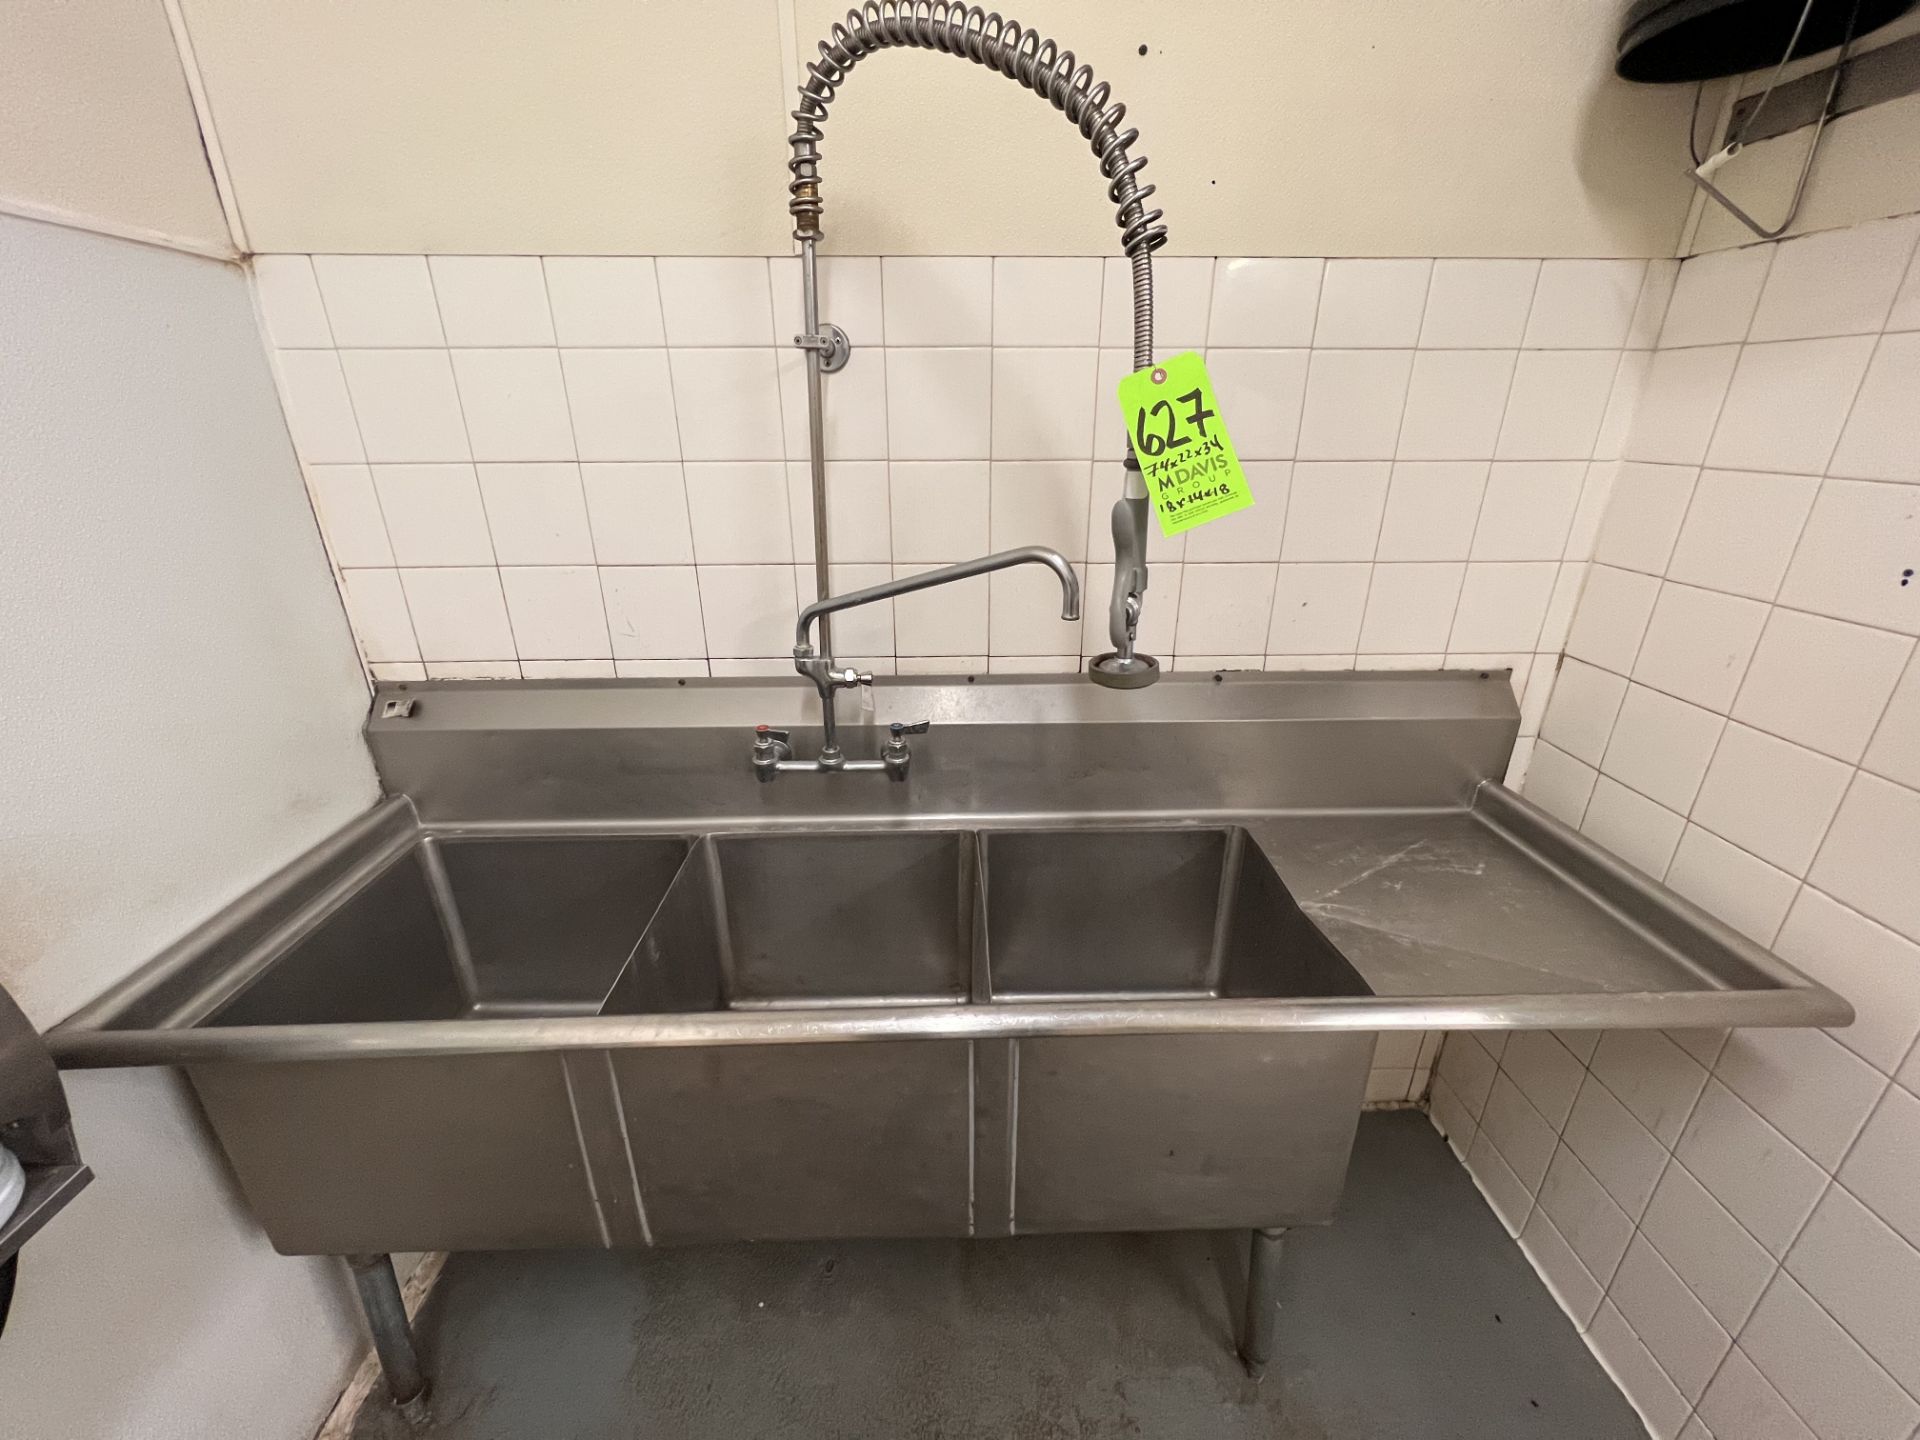 3-BOWL S/S SINK, APPROX. OVERALL DIMS: 74 IN. L X 22 IN. W X 34 IN. H, BOIWL APPROX DIMS: (3) 18 IN. - Bild 2 aus 4